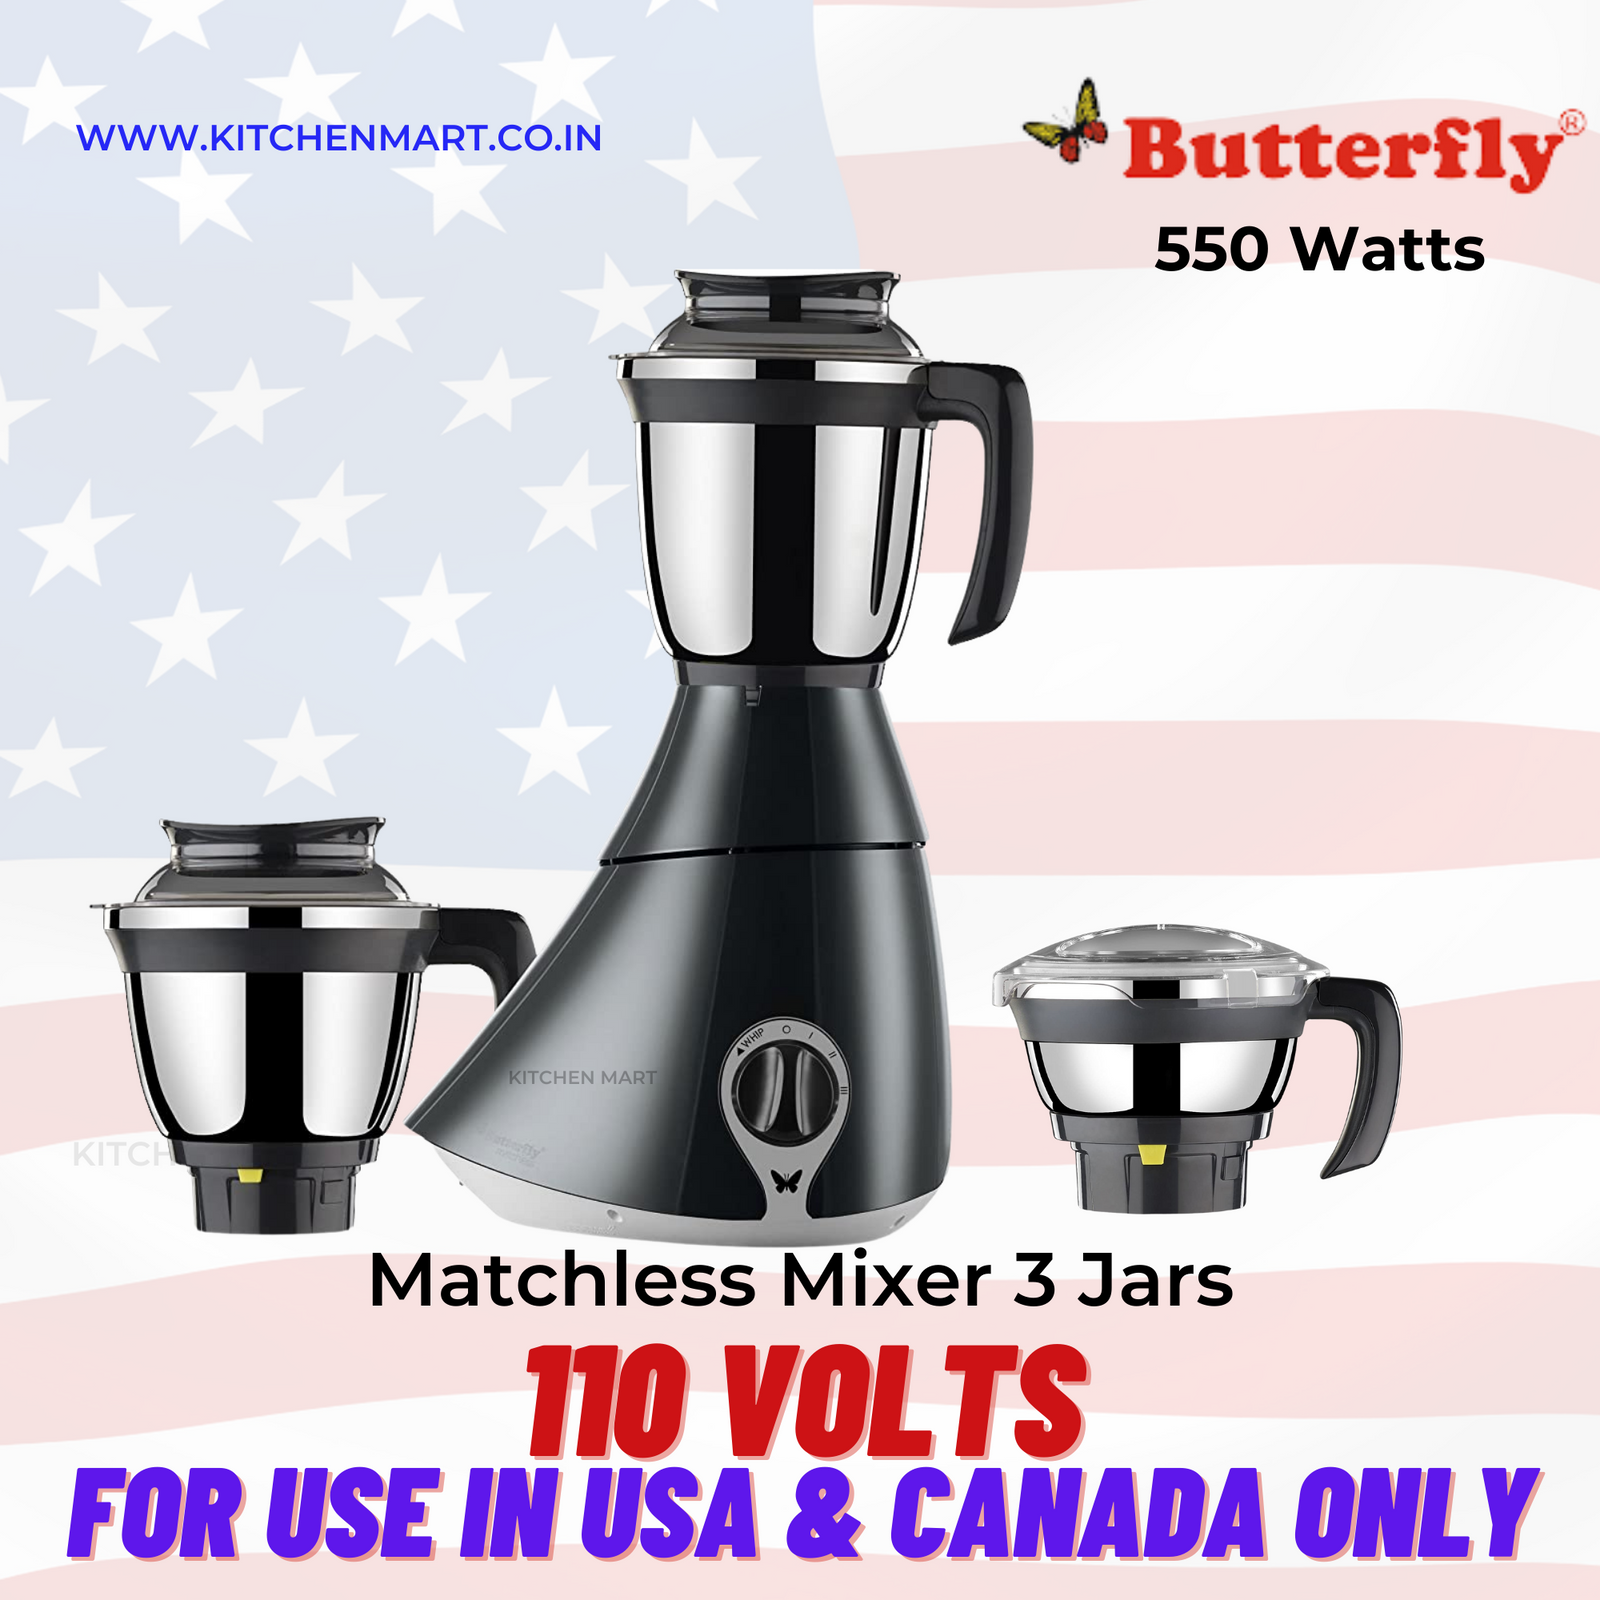 Butterfly Matchless Mixer Grinder 550 watts, 110 votls for use in USA & Canada only